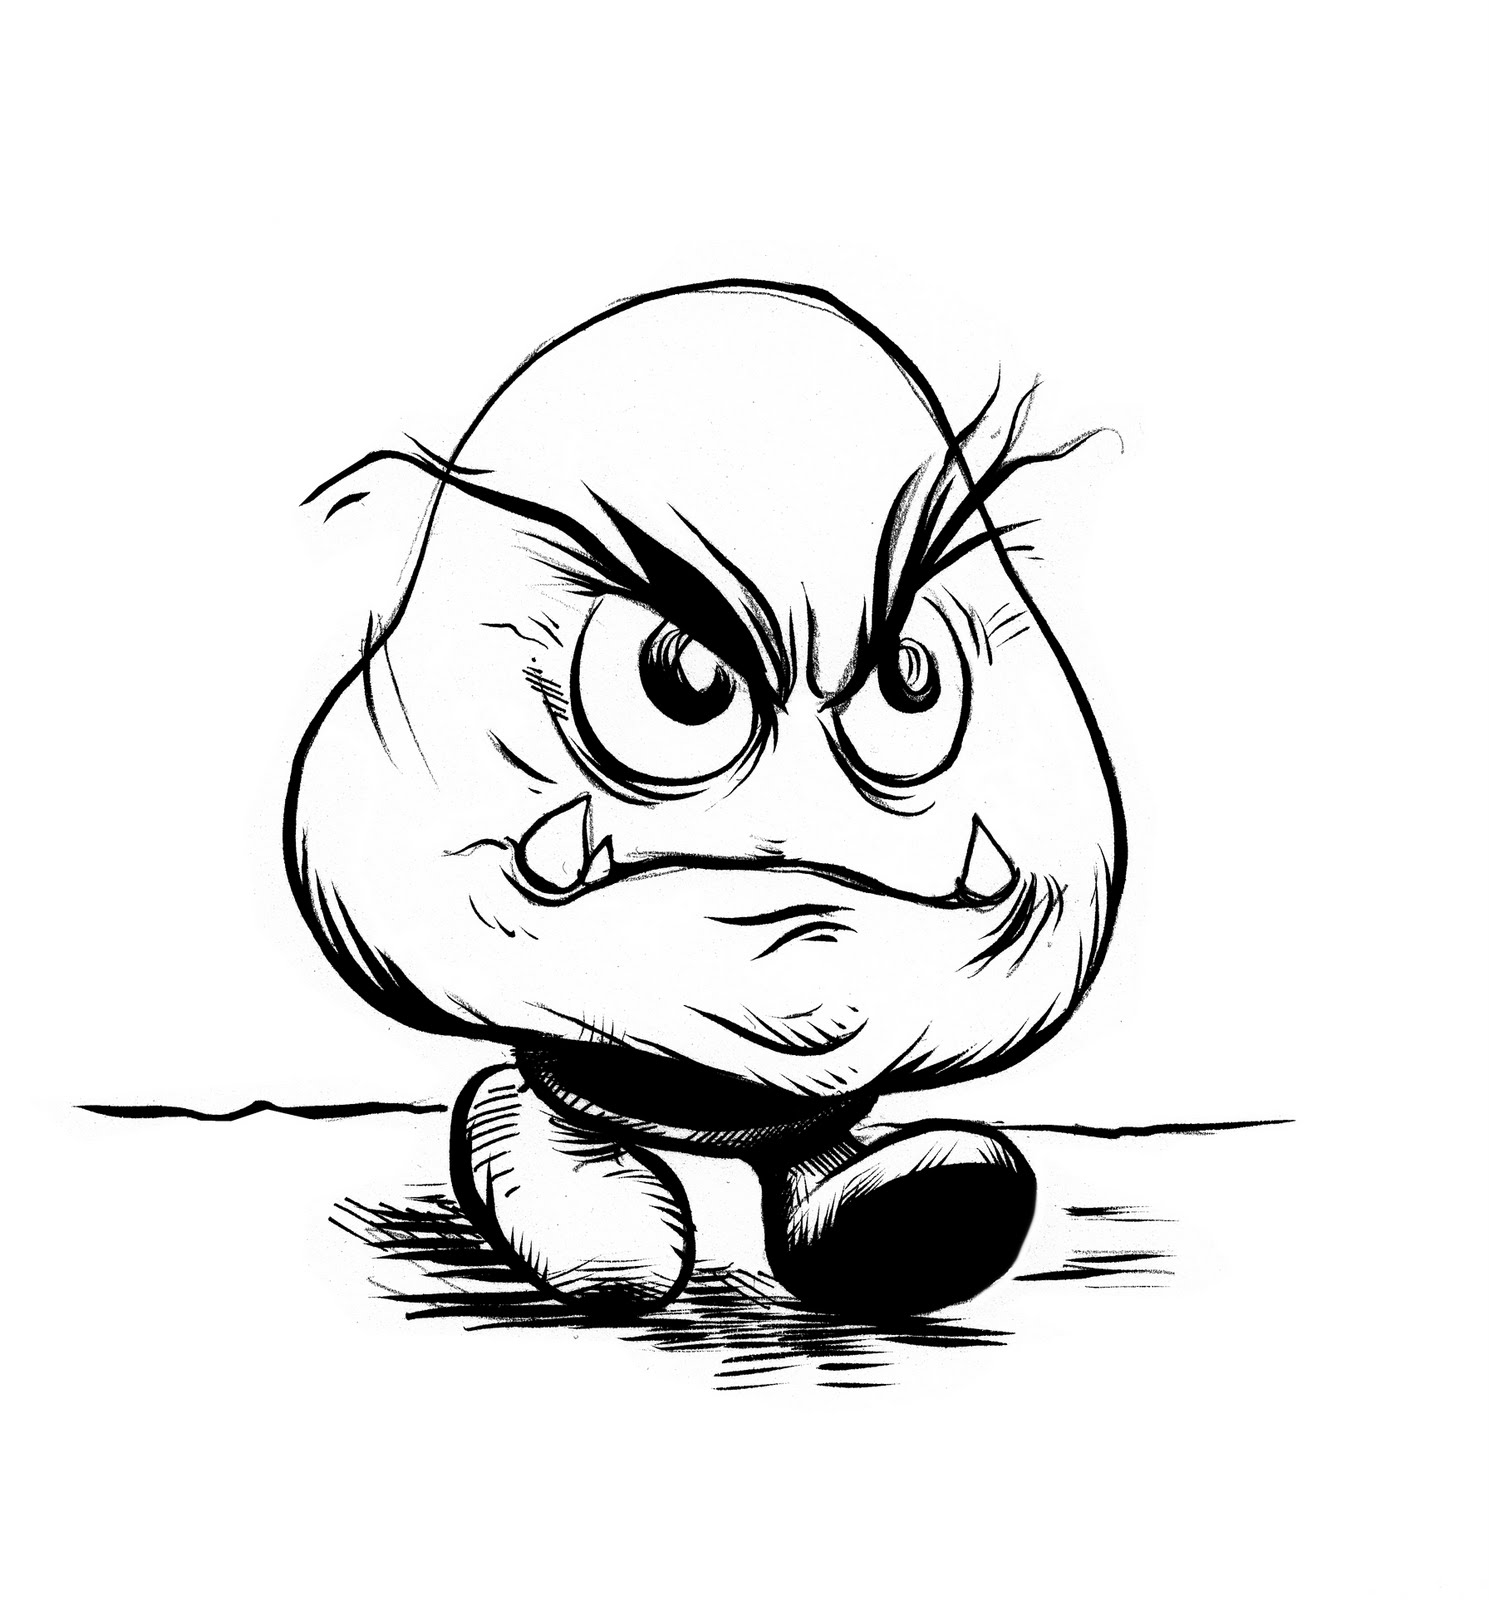 Goomba Sketch Coloring Page